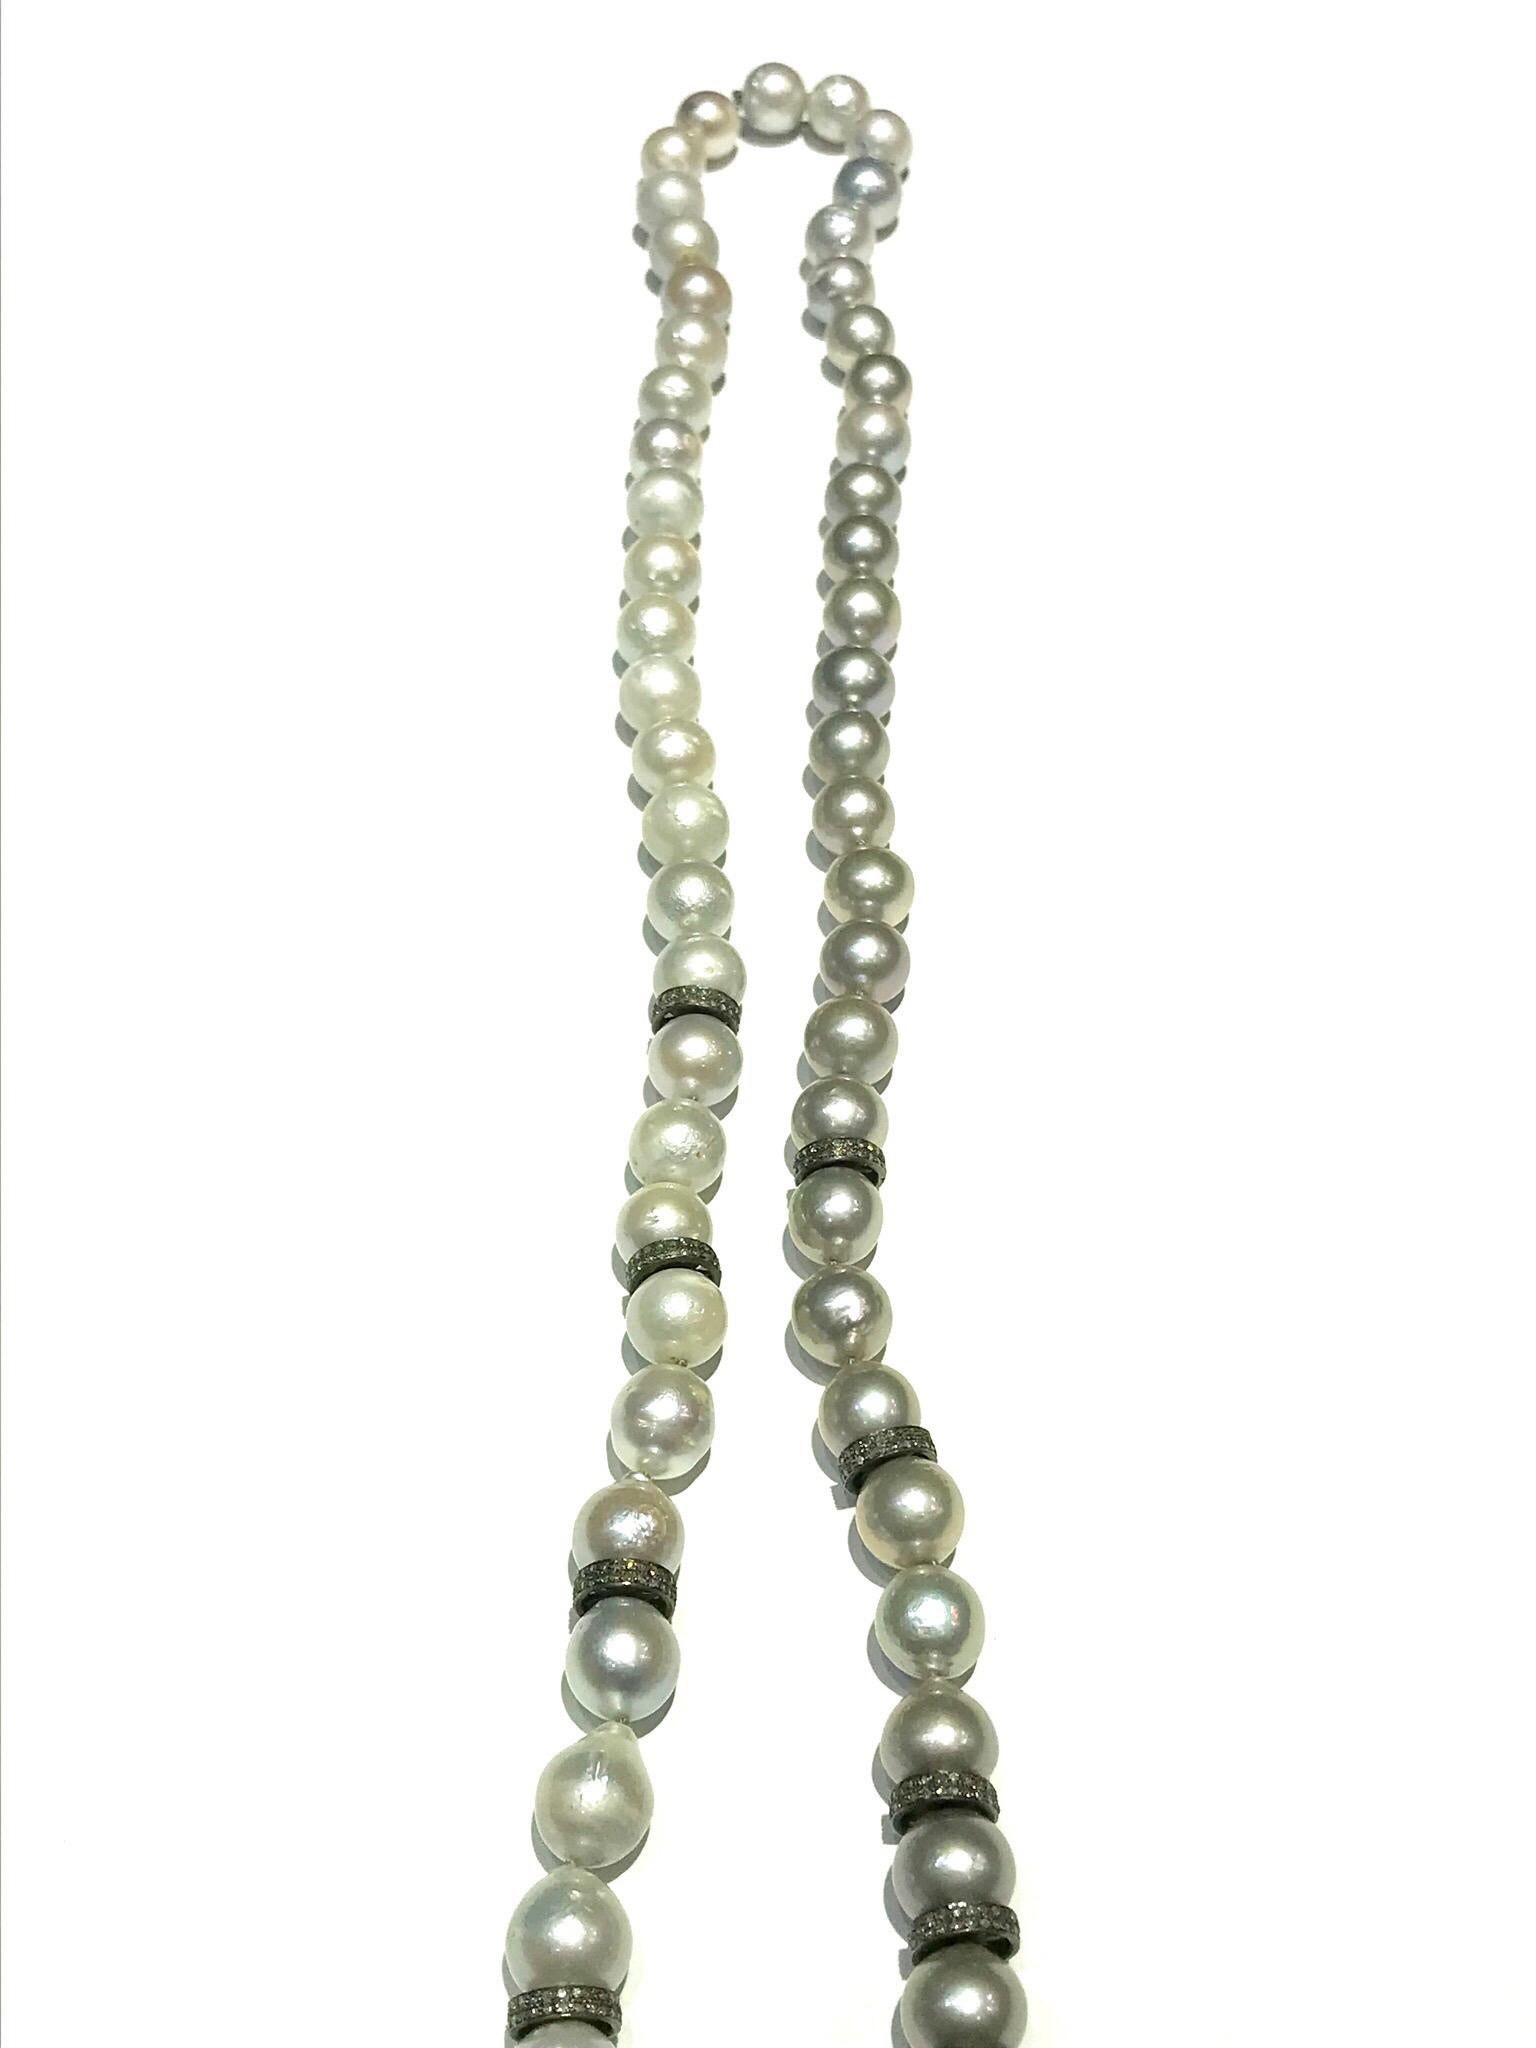 This is a perfect piece for those into fashion!  A Samira13 designed South Sea Pearl and Diamond rondelle long necklace with a silk cord tassle.  The necklace features 62 South Sea Pearls, varying in color from off white, to silver, to dark gray,